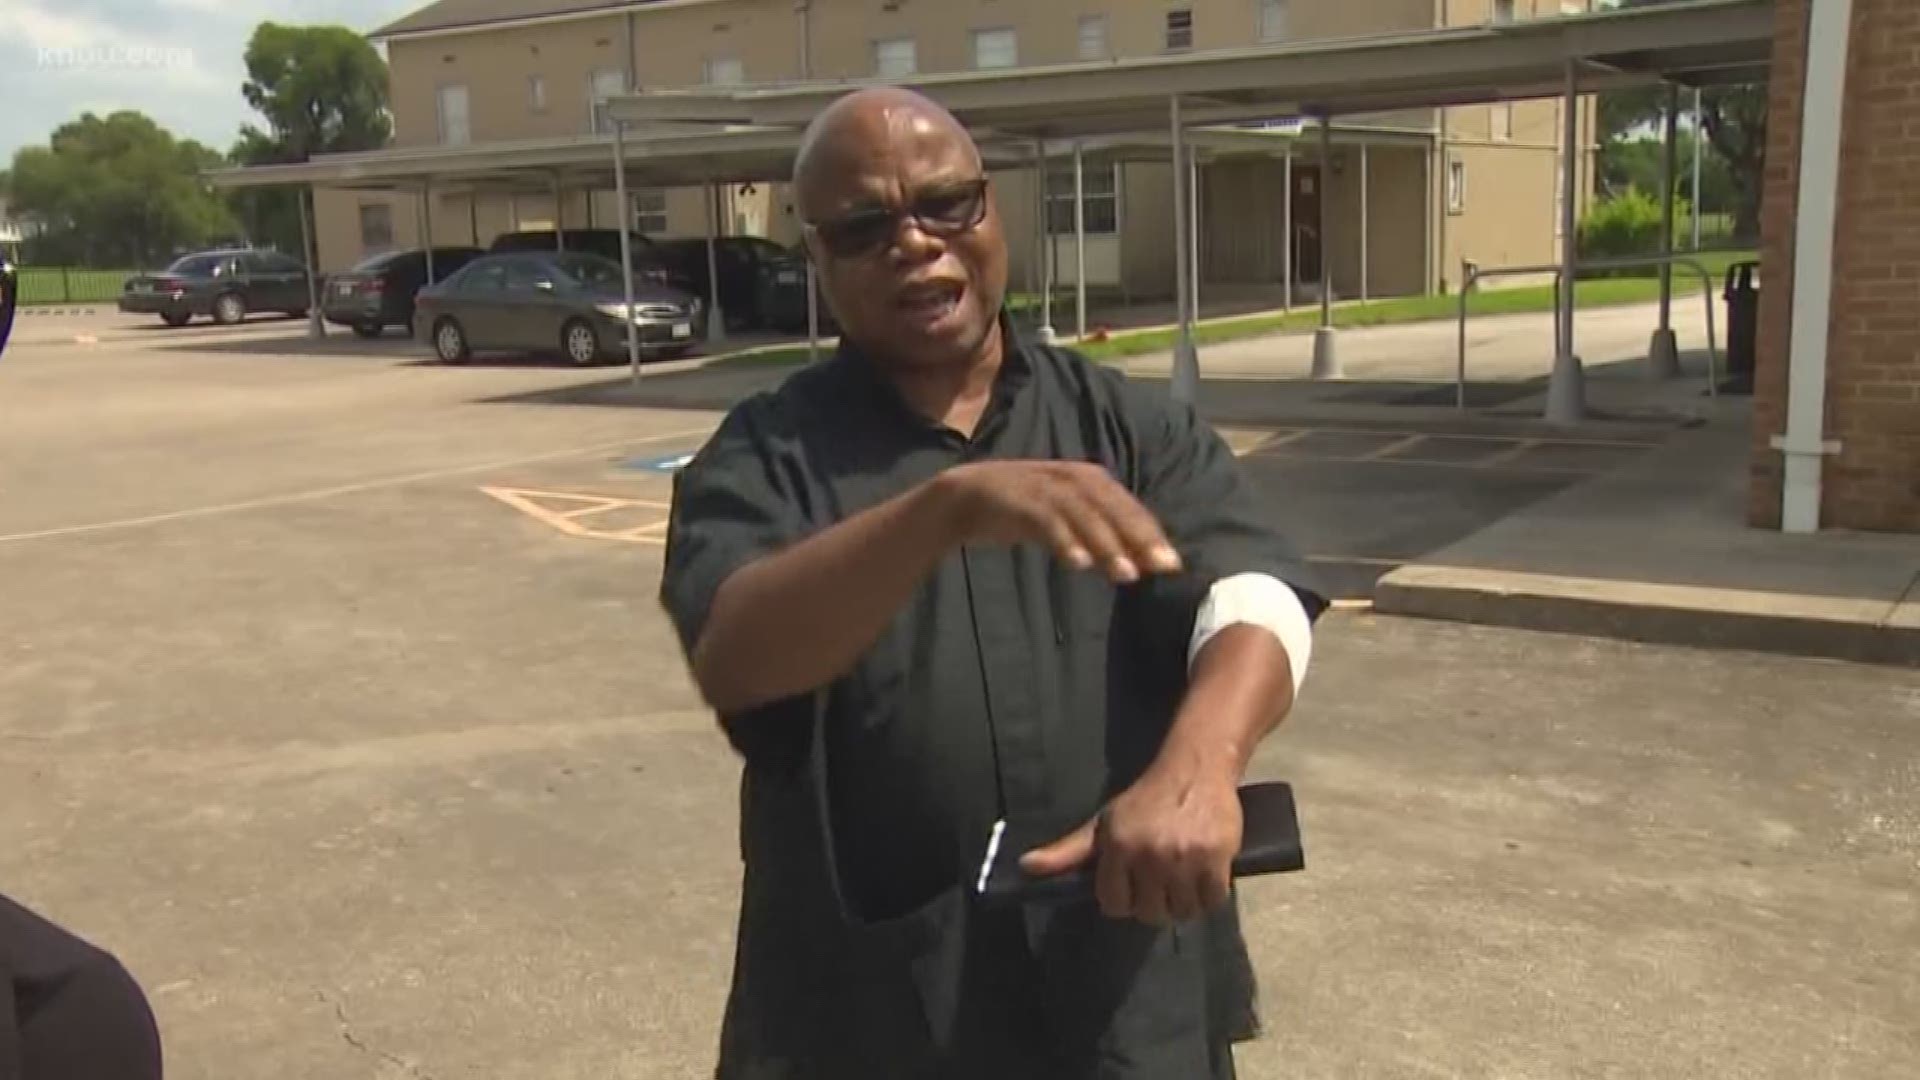 One of the victims of a violent crime spree that ended with a Houston police officer shot and wounded, was a priest. Father Desmond Ohankwere was walking behind St. Peter The Apostle Catholic Church and praying the rosary when he was ambushed by four young men.